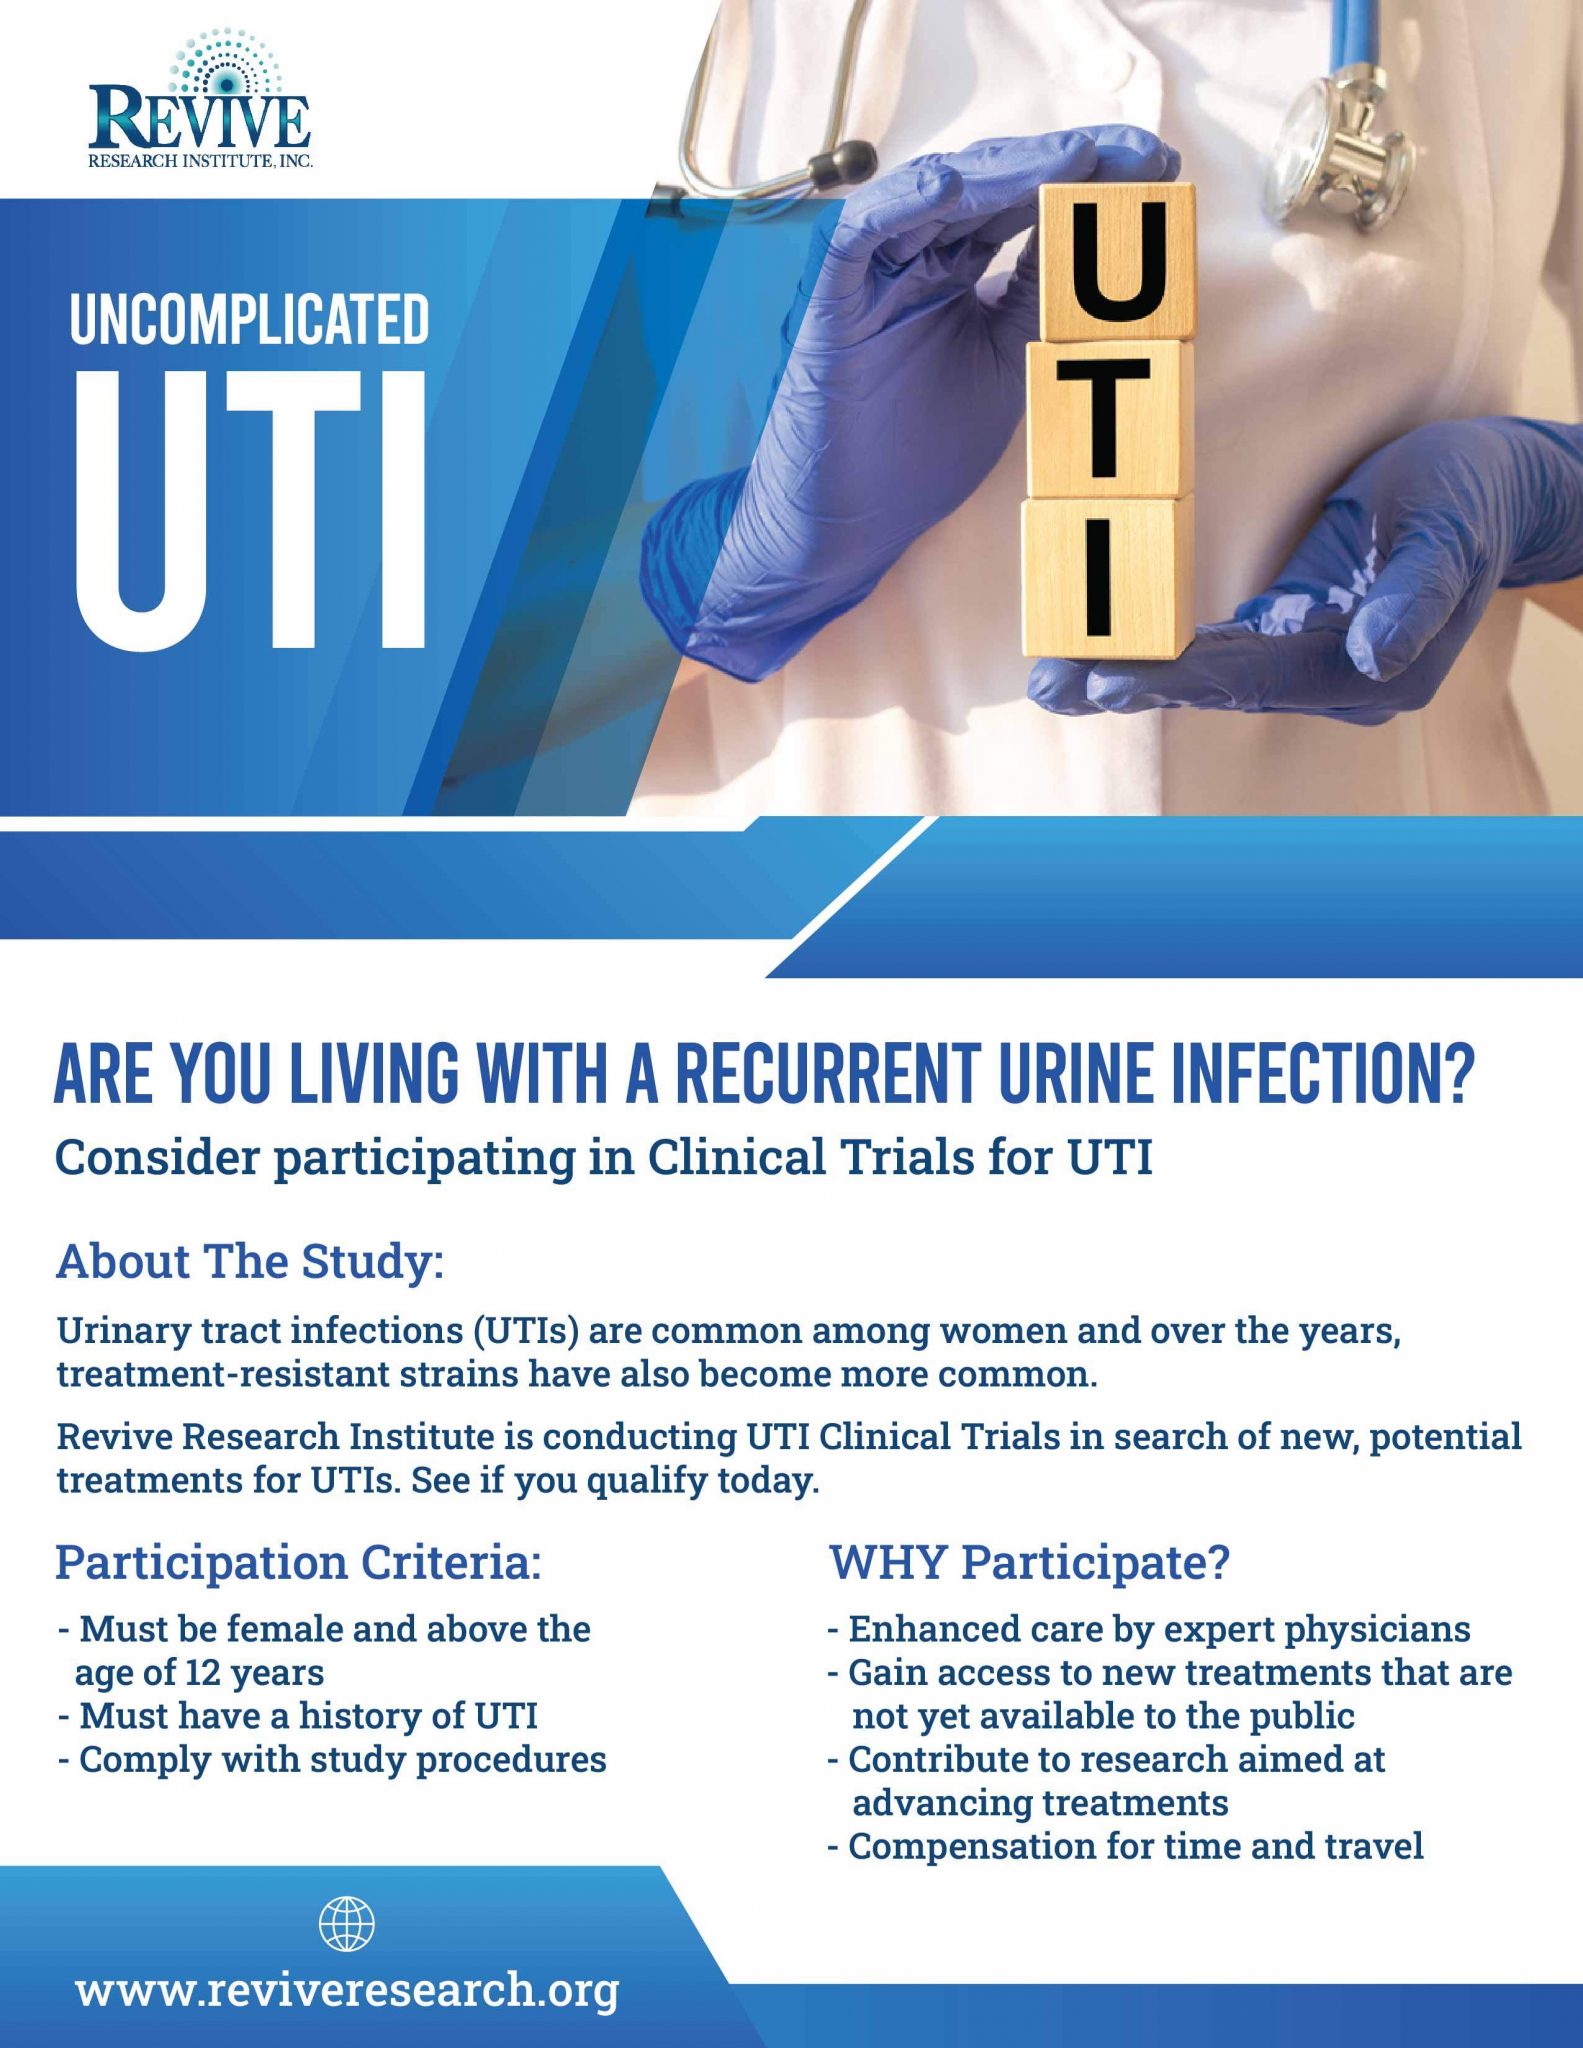 latest research on uti